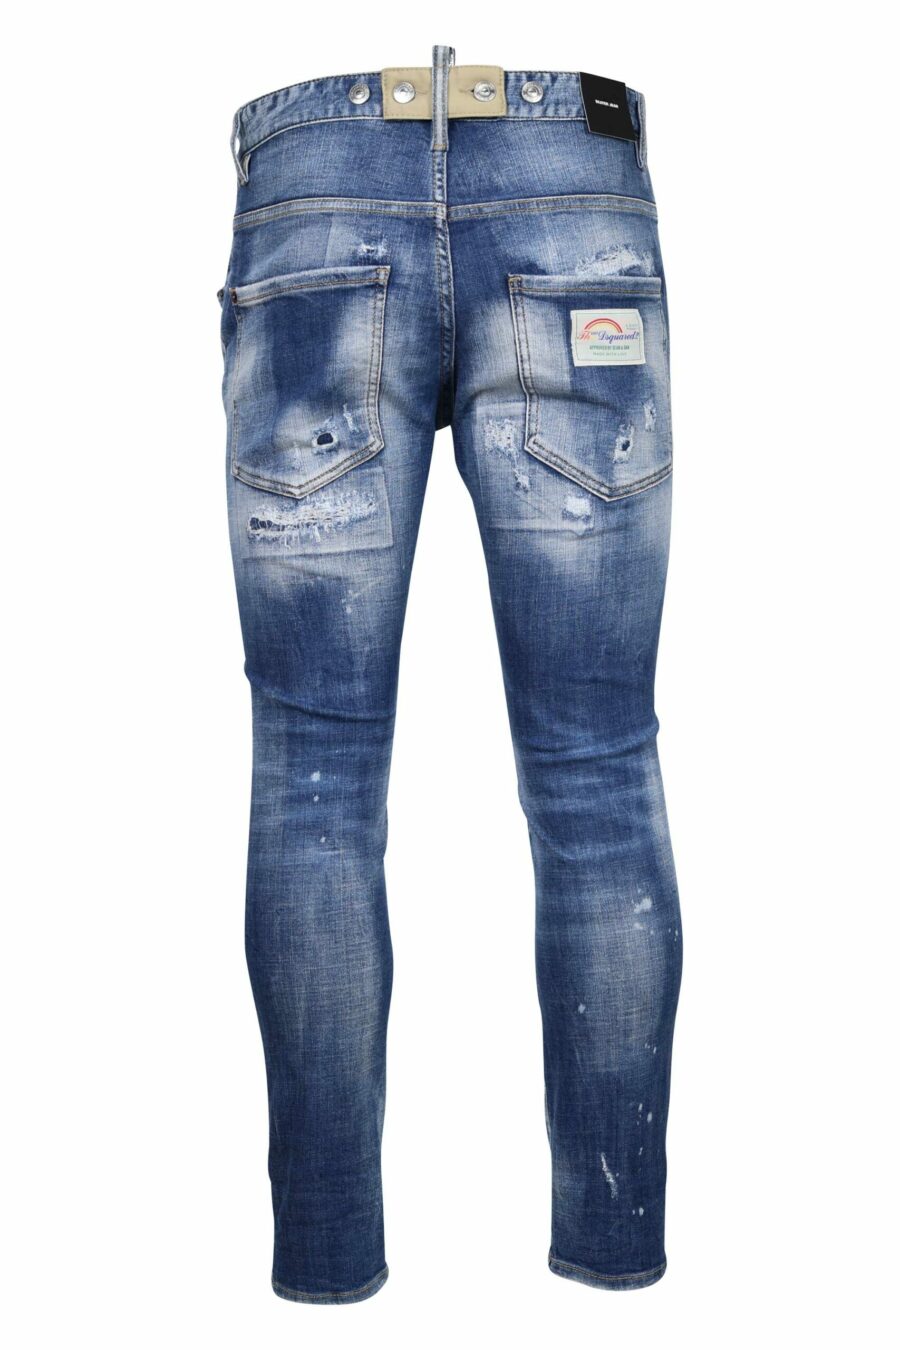 Light blue jeans "skater jean" with rips and frayed - 8054148338848 2 scaled